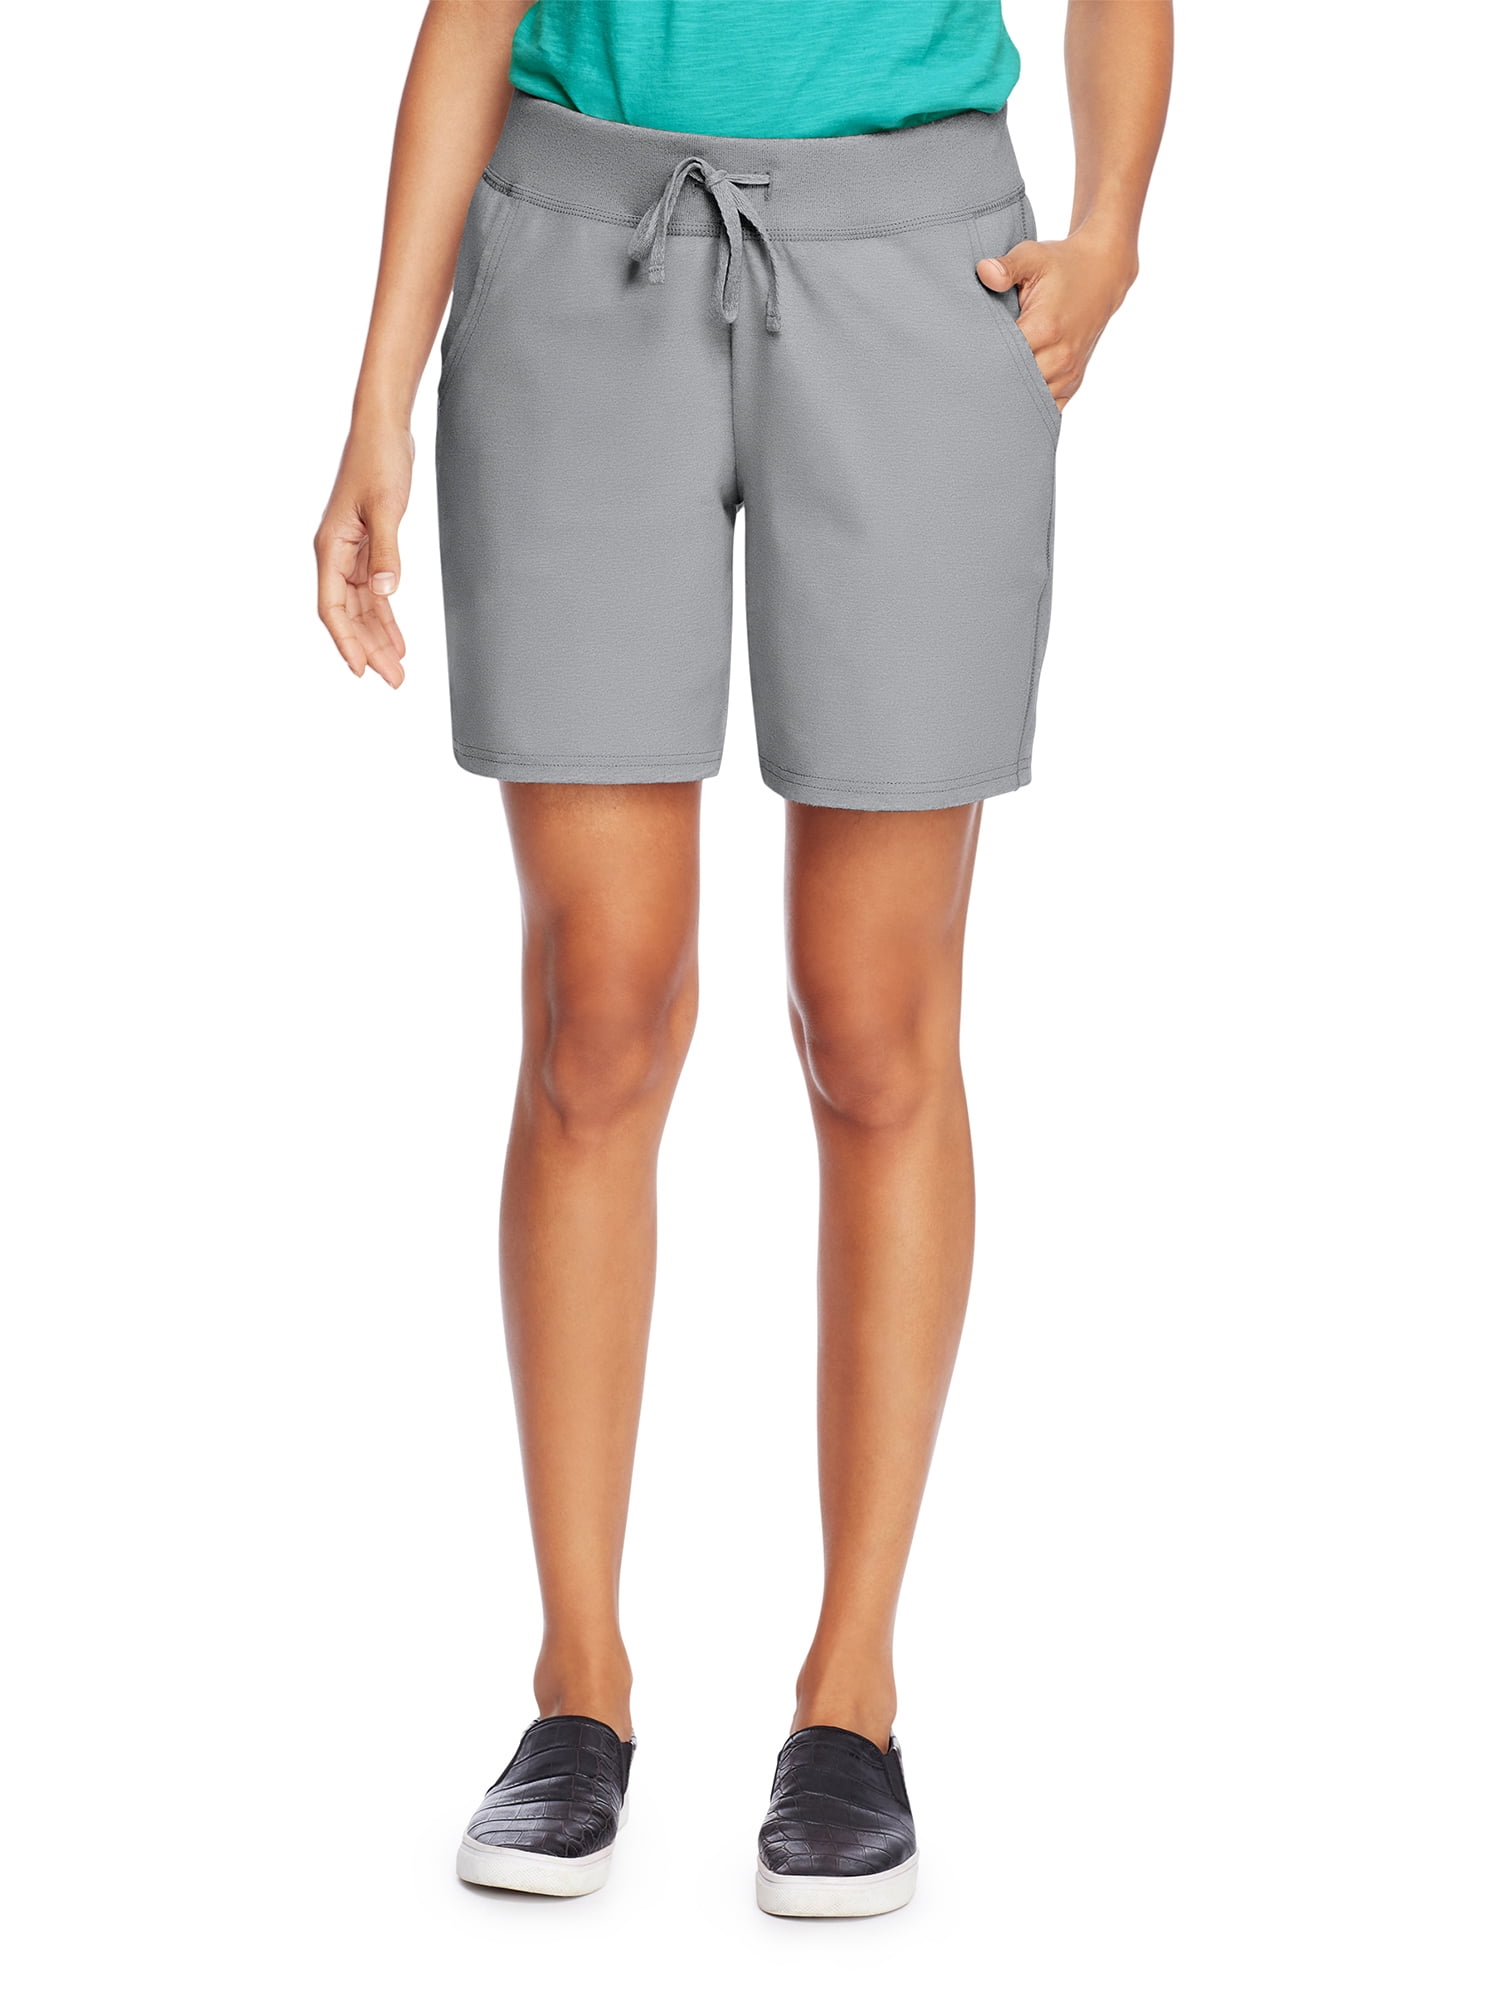 women's cotton jersey shorts with pockets